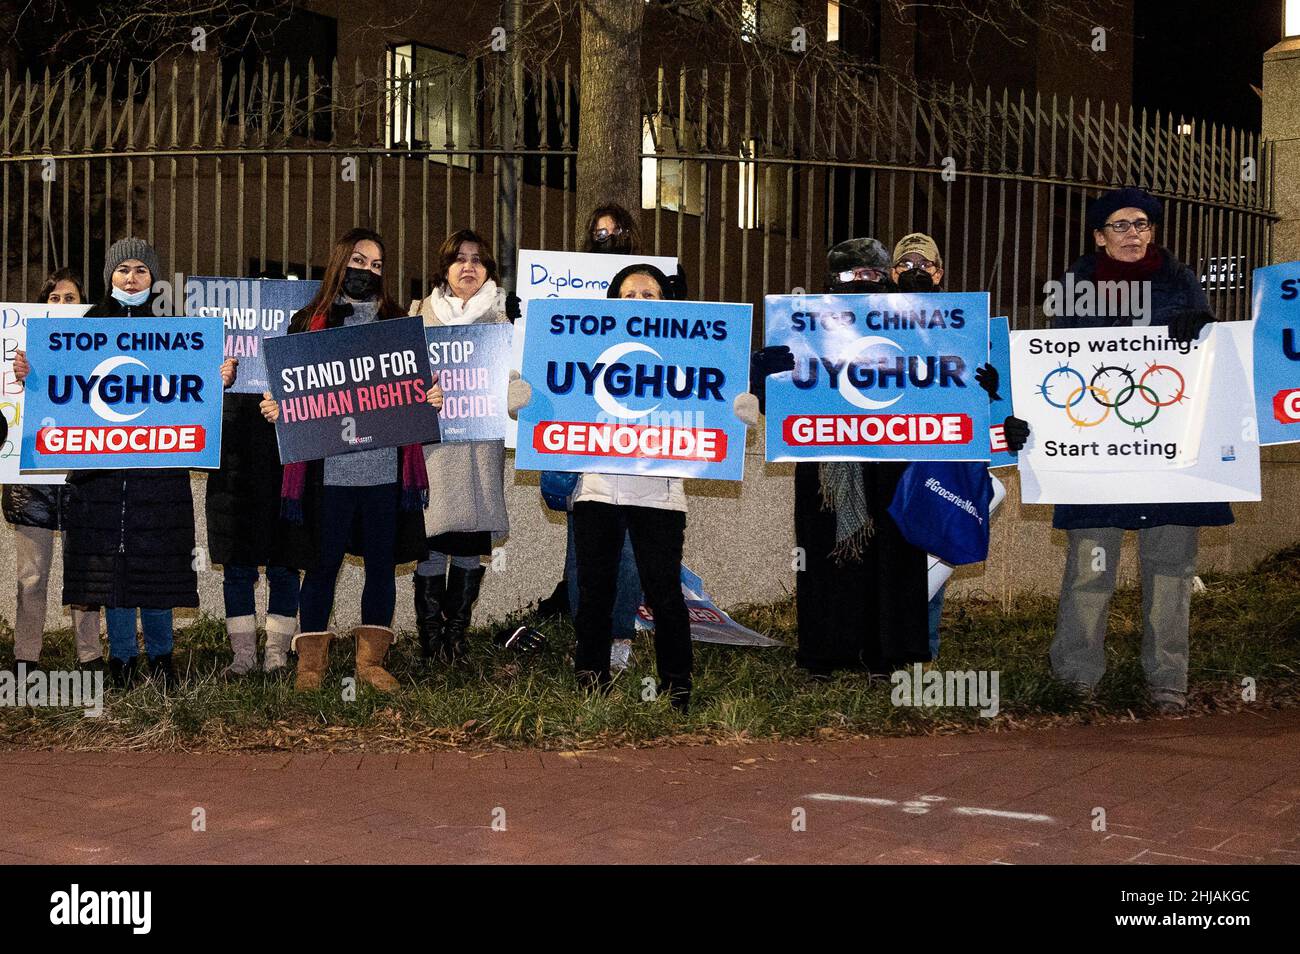 Washington, United States. 27th Jan, 2022. Protesters hold signs that say 'Stop China's Uyghur Genocide', 'Stop watching. Start acting', and 'Stand up for Human Rights' at a protest at the Chinese Embassy against the Uyghur genocide and the Beijing Winter Olympics.The Uyghur Crisis Response Team of the Social Action Committee of Congregation Adas Israel in Washington, DC, sponsored the demonstration. Credit: SOPA Images Limited/Alamy Live News Stock Photo